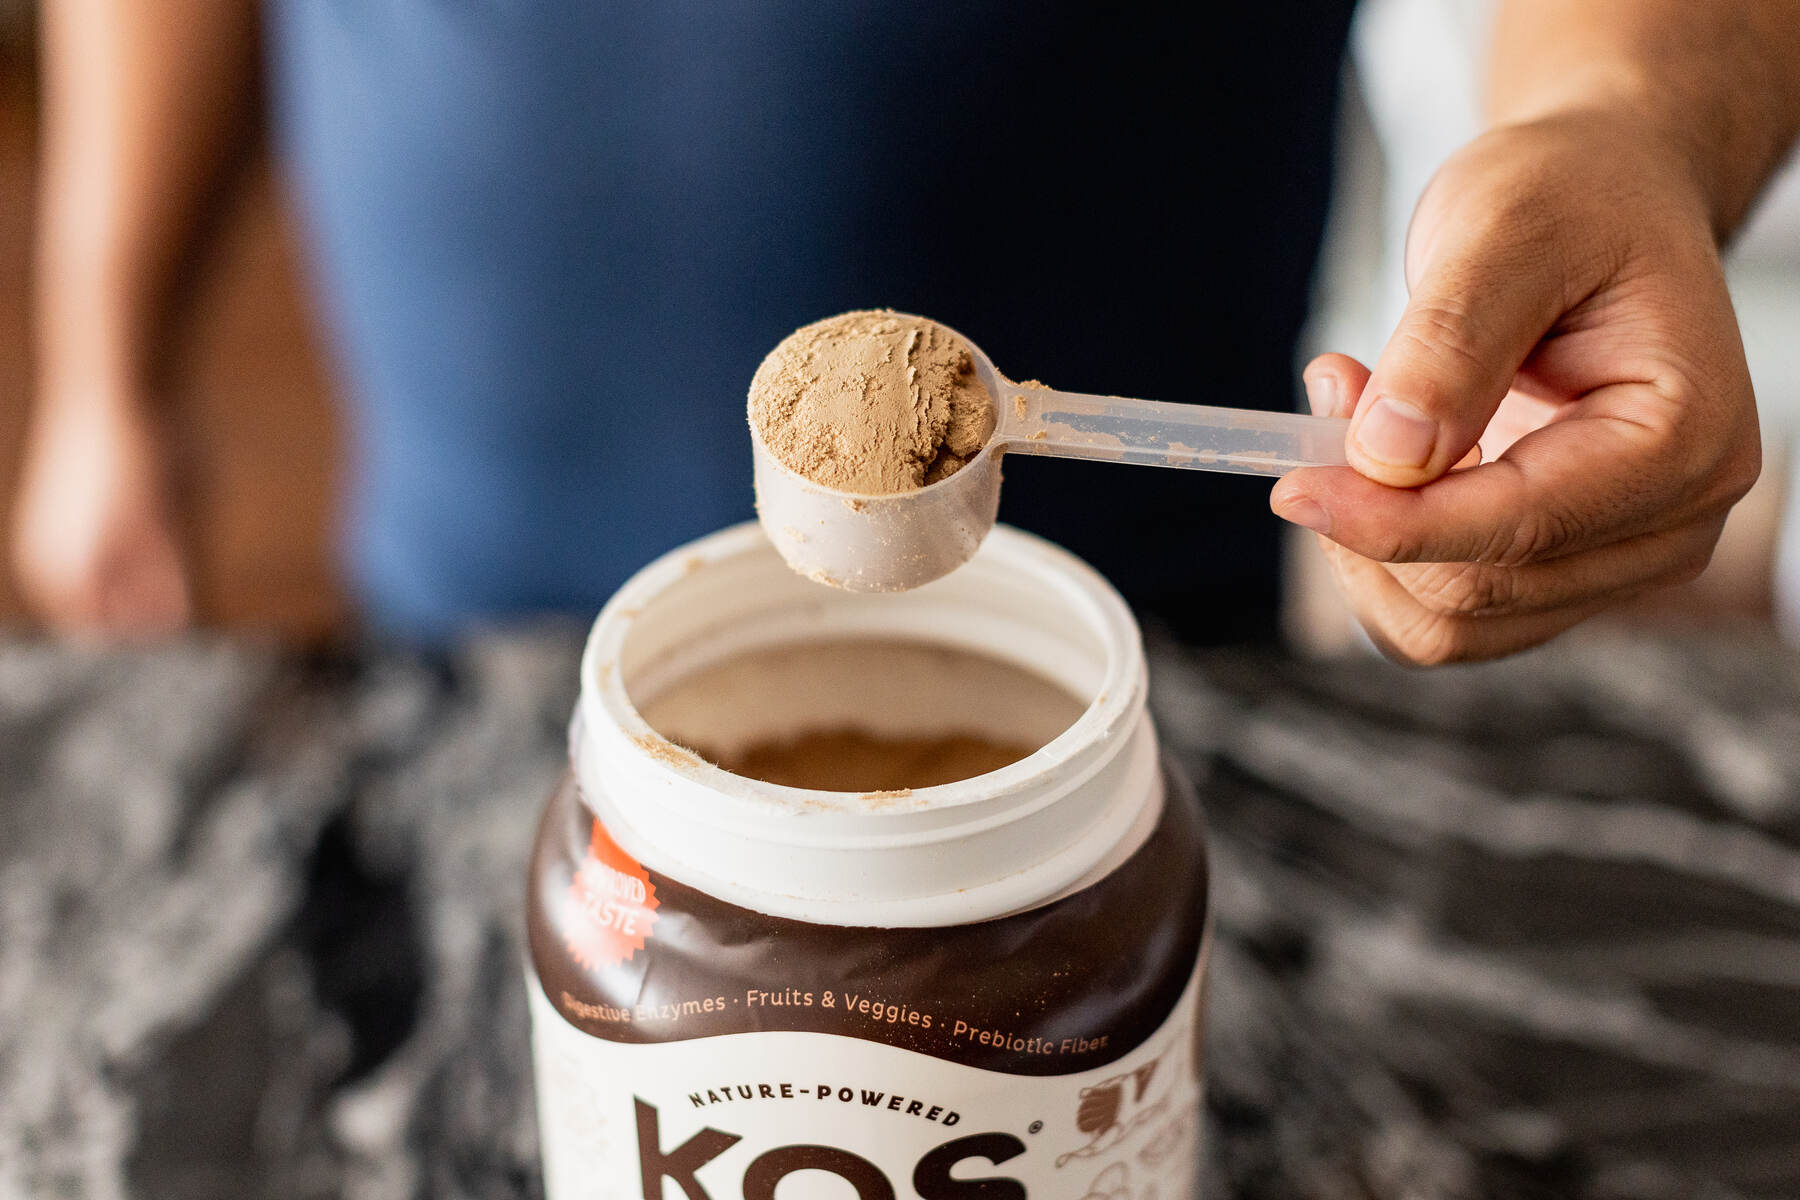 A person's hand holding a scoop of KOS Organic Superfood Plant Protein powder above the open container, with a marbled countertop in the background